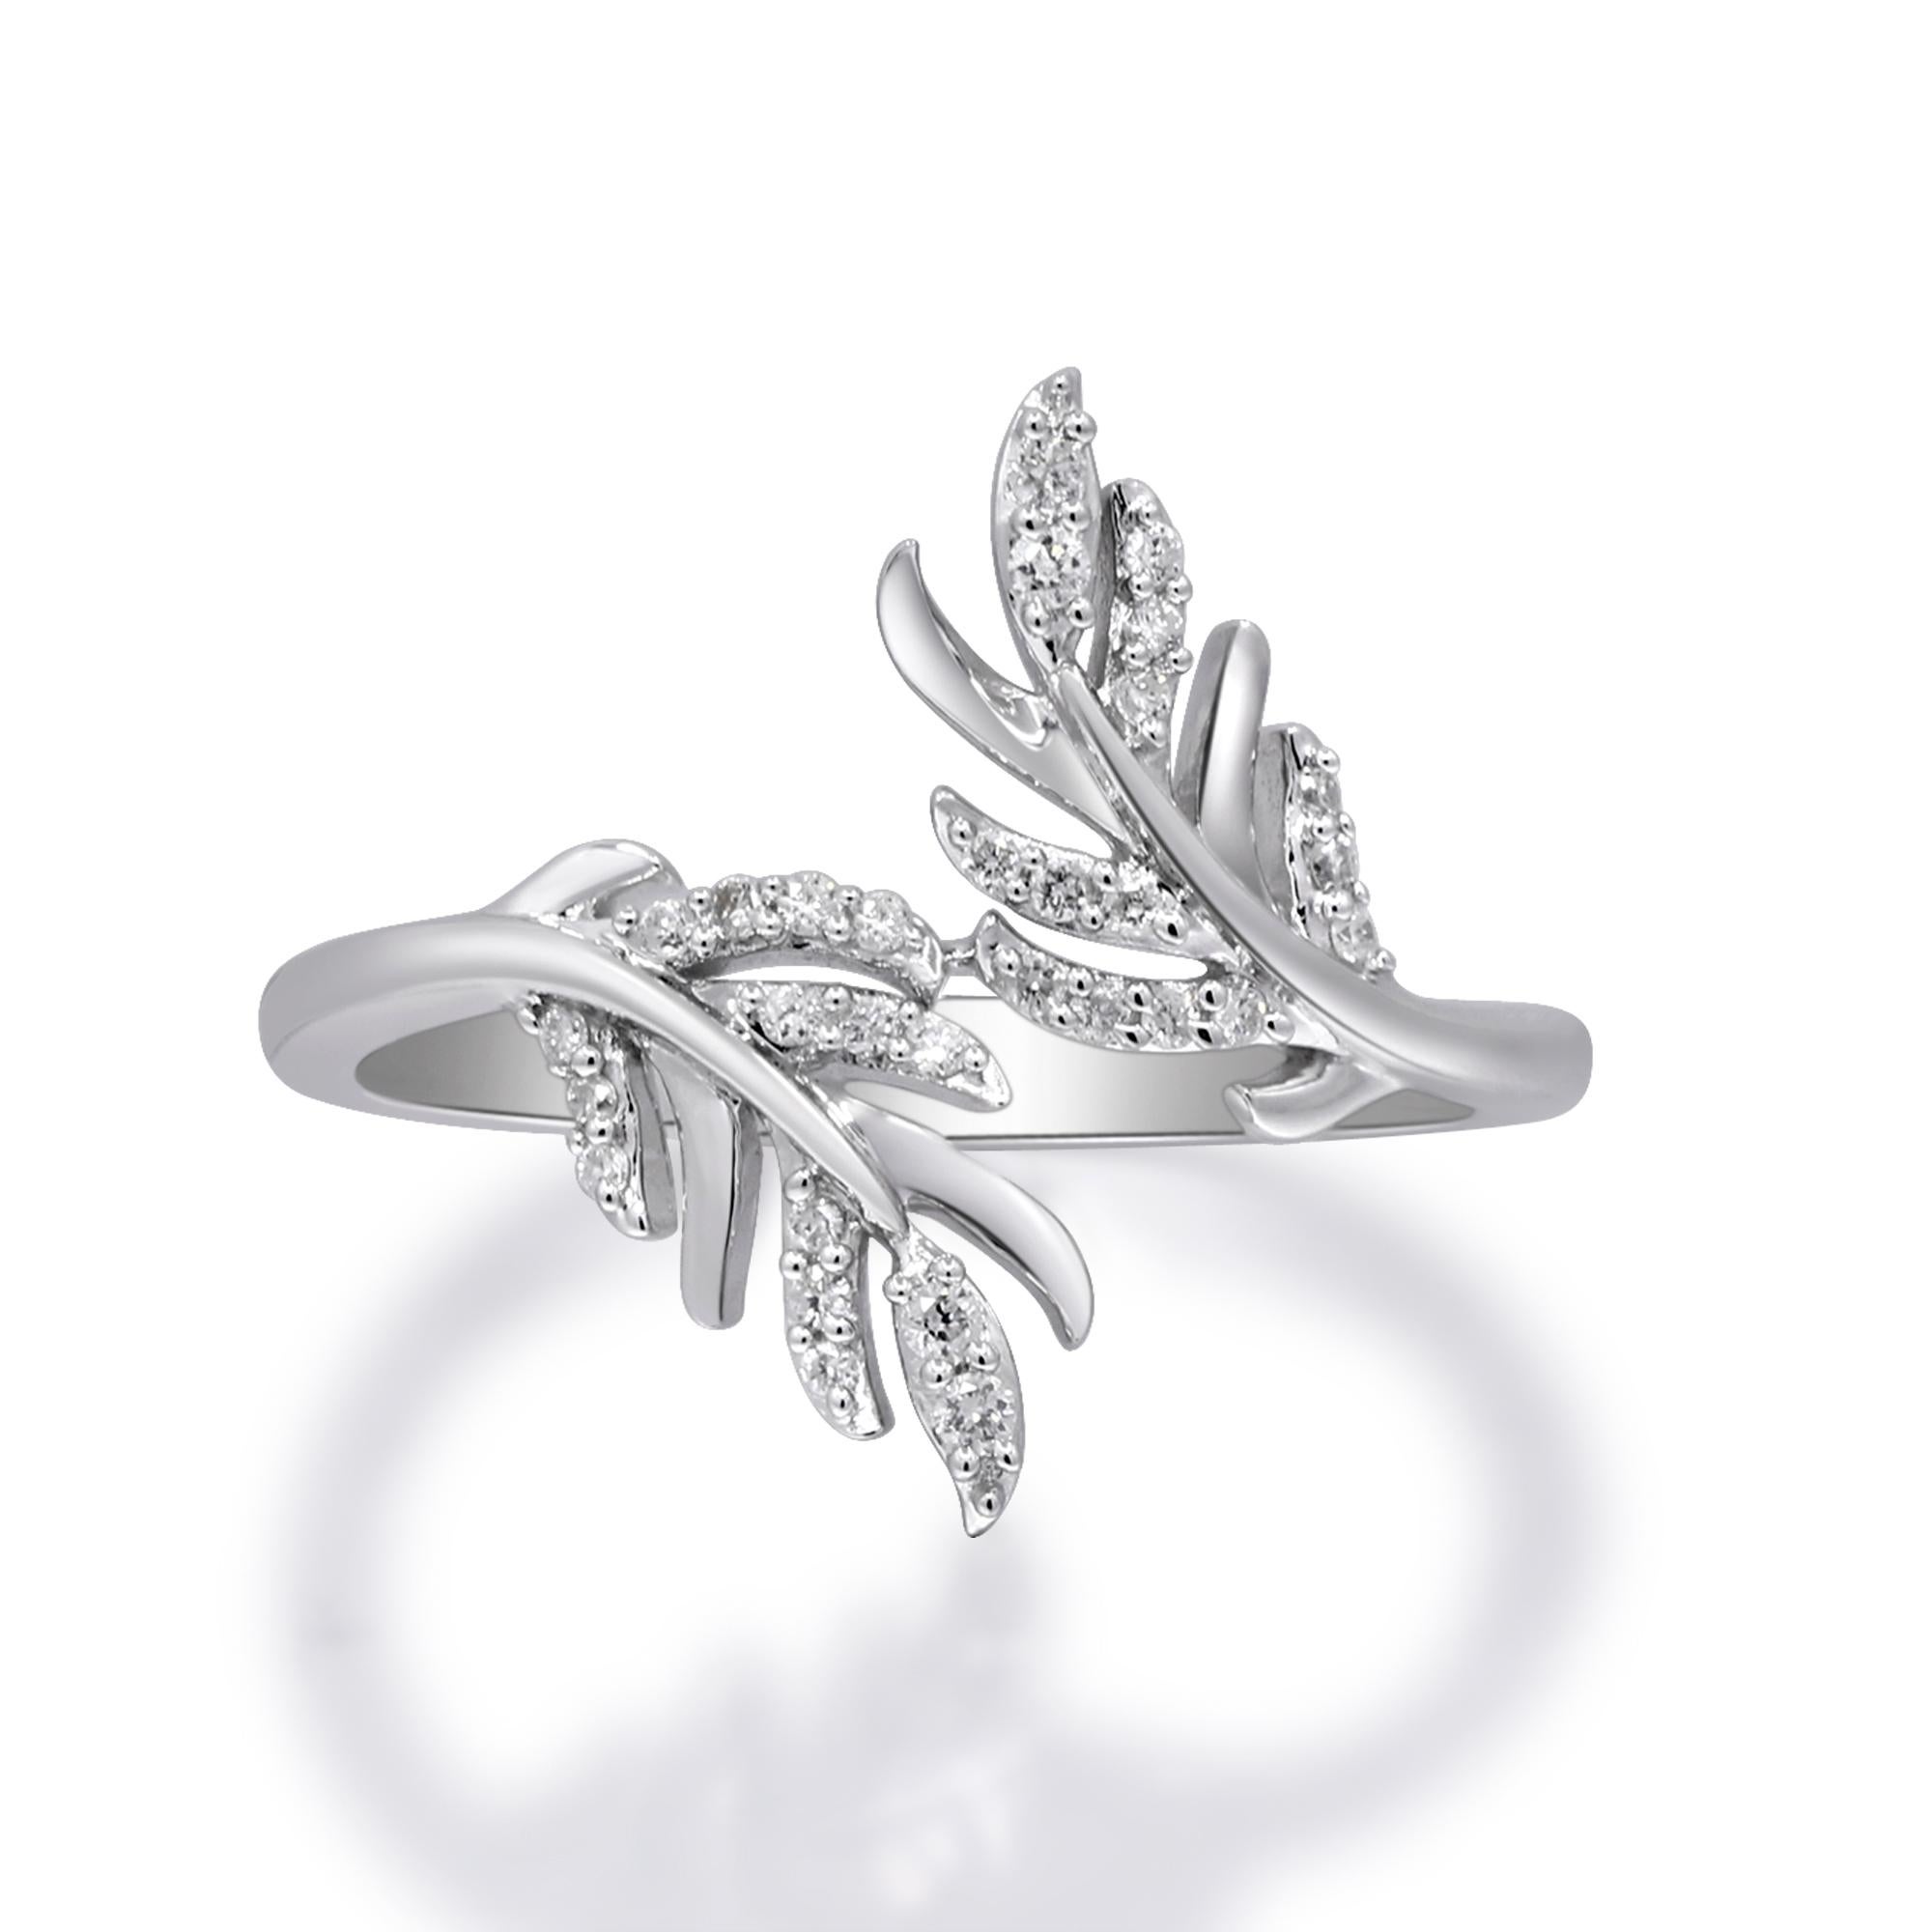 Stunning, timeless and classy eternity Unique Ring. Decorate yourself in luxury with this Gin & Grace Ring. The 925 Sterling Silver jewelry boasts with Round-cut (30 pcs) 0.13 carat White Diamond accent stones for a lovely design. This Ring is